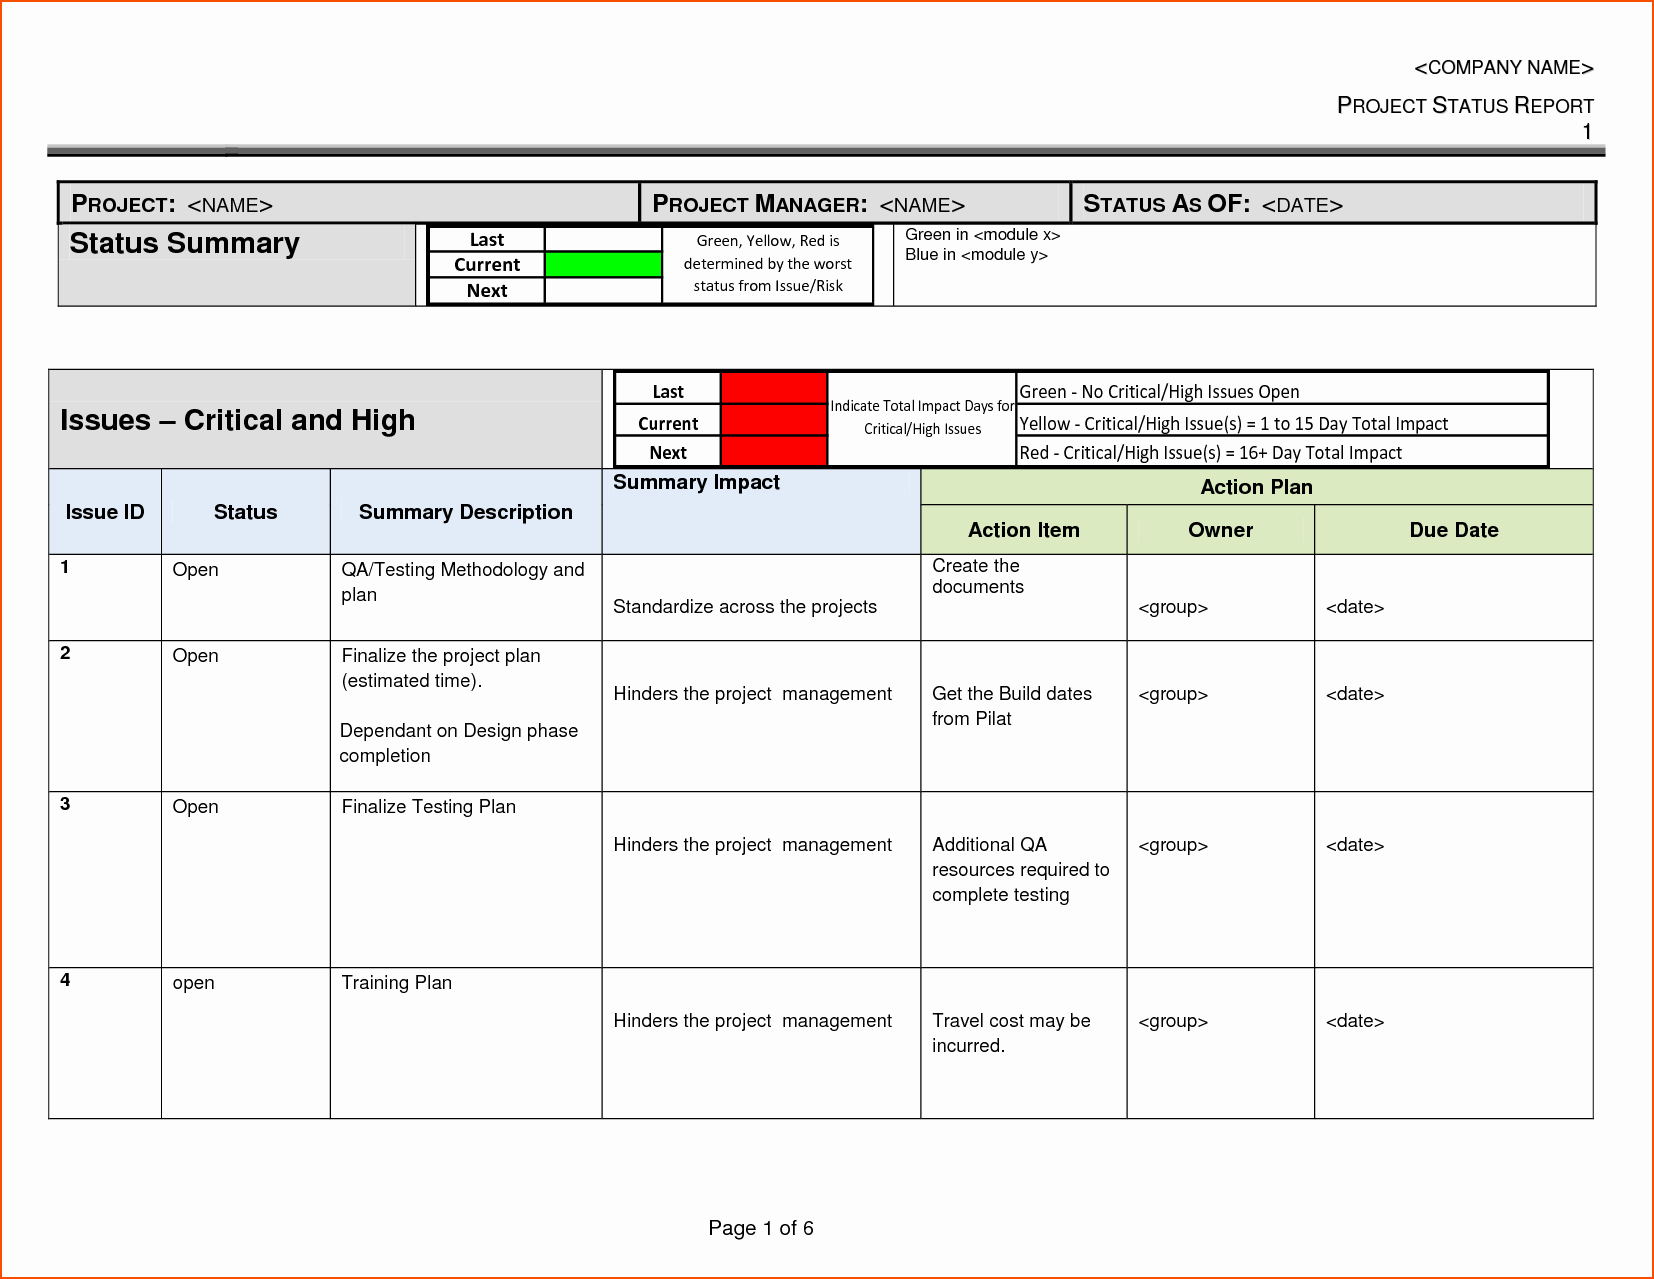 Project Status Report Sample Excel 7 Project Status